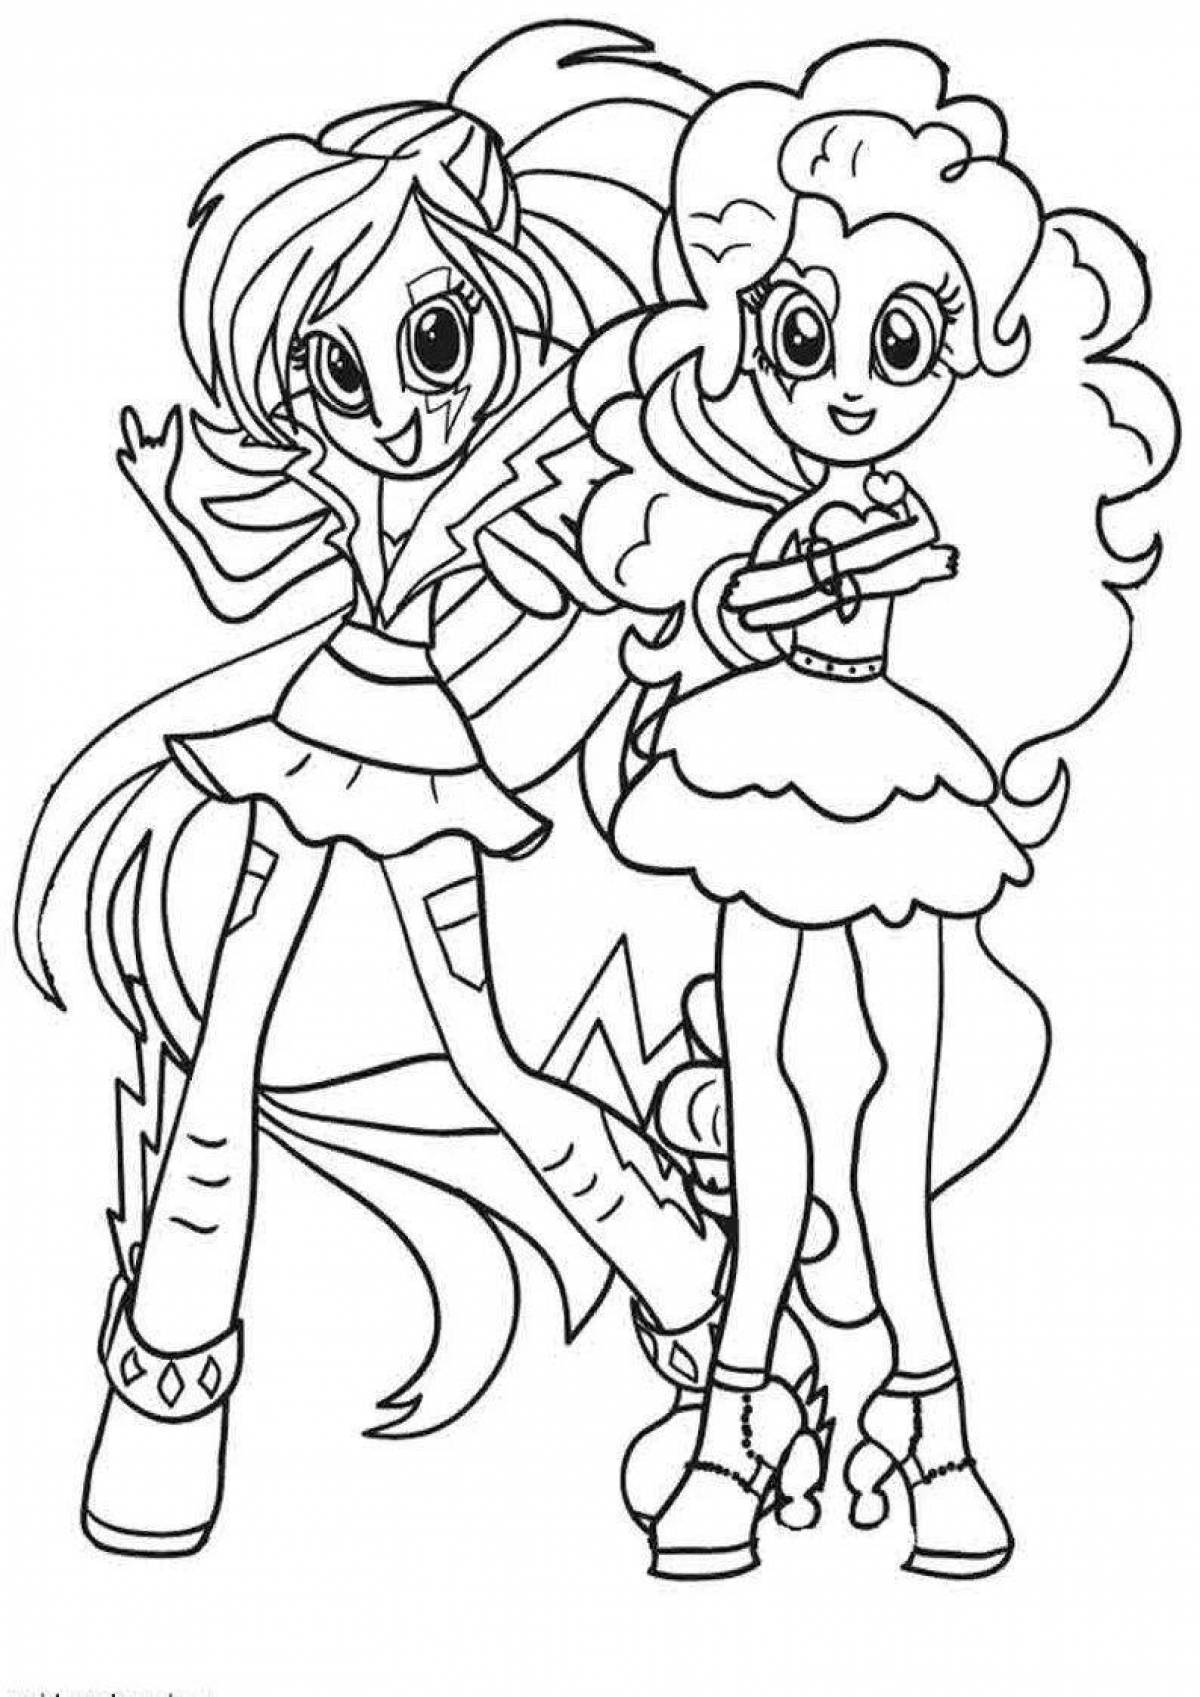 Animated coloring page my little pony equestria girl